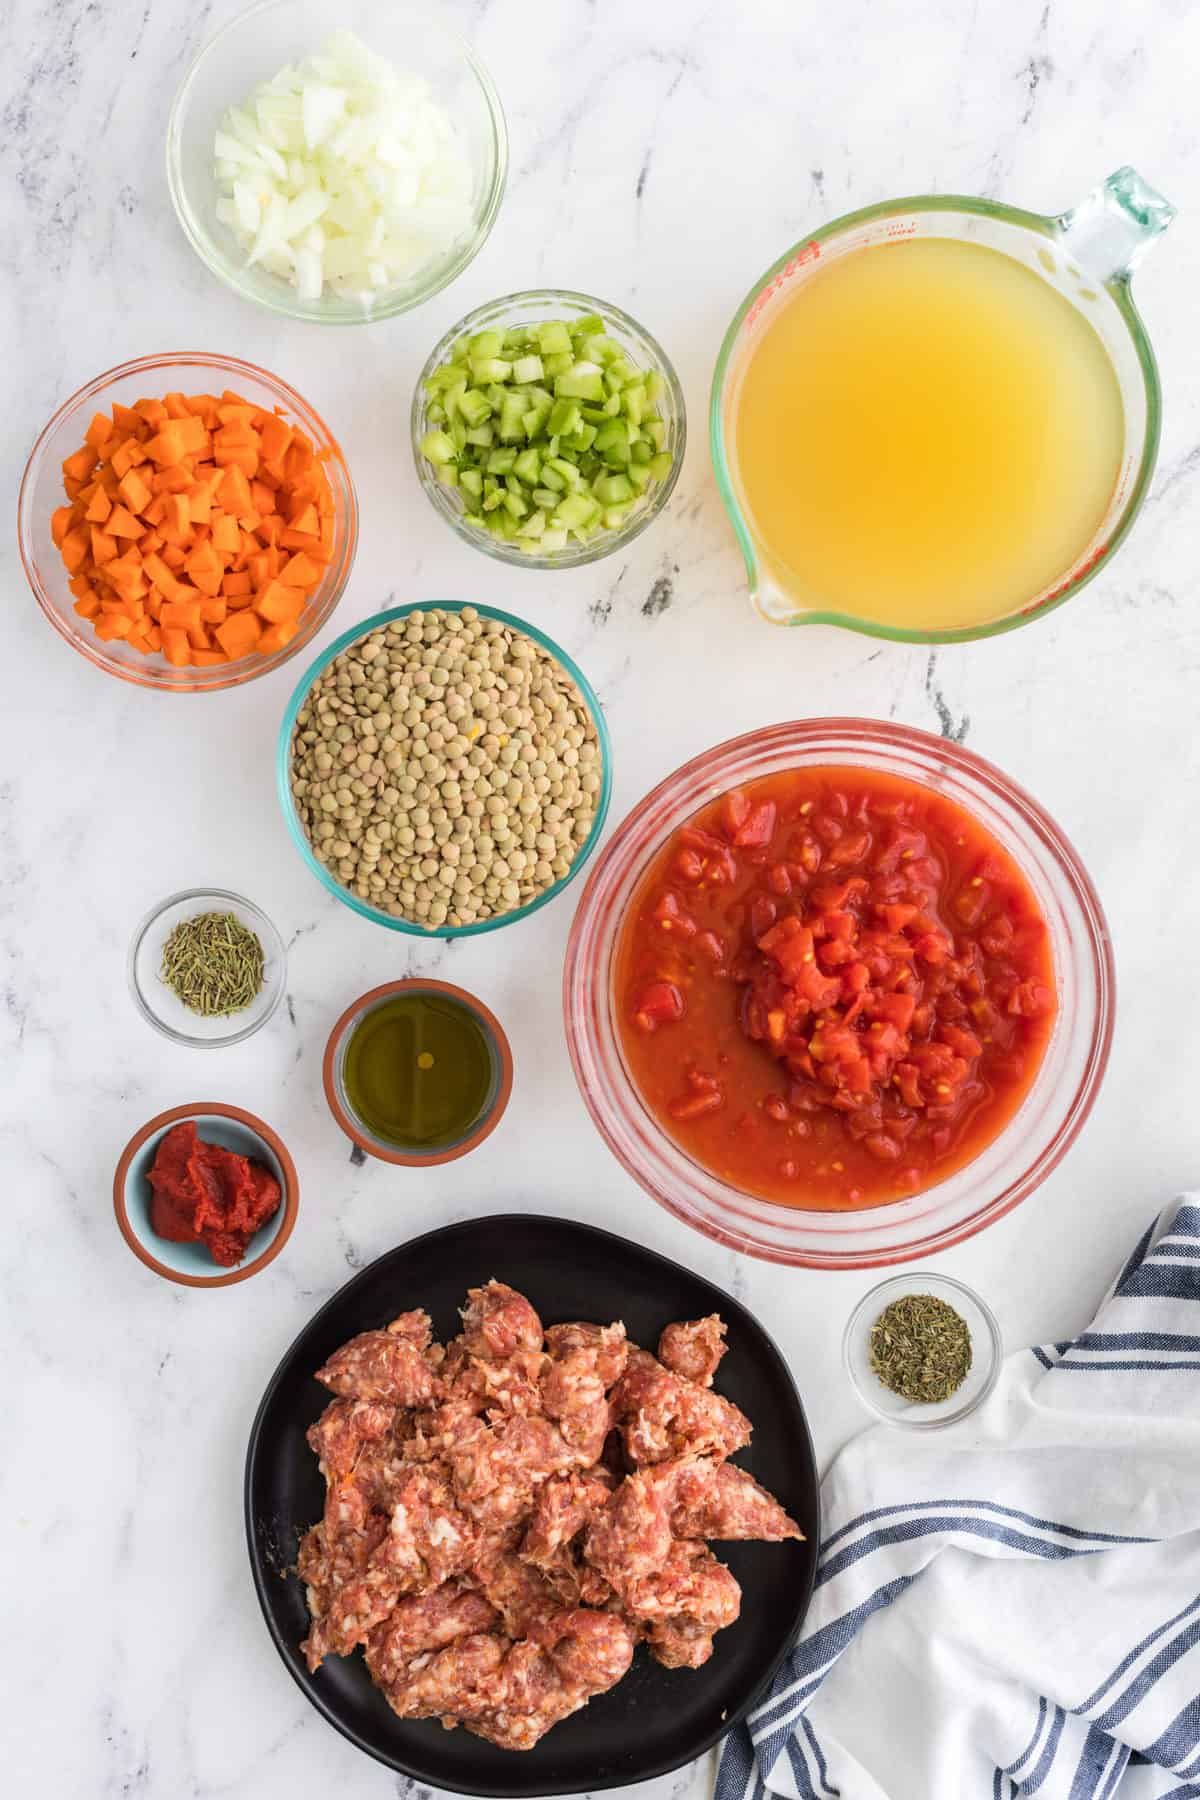 Ingredients Needed To Make Instant Pot Sausage and Lentil Soup